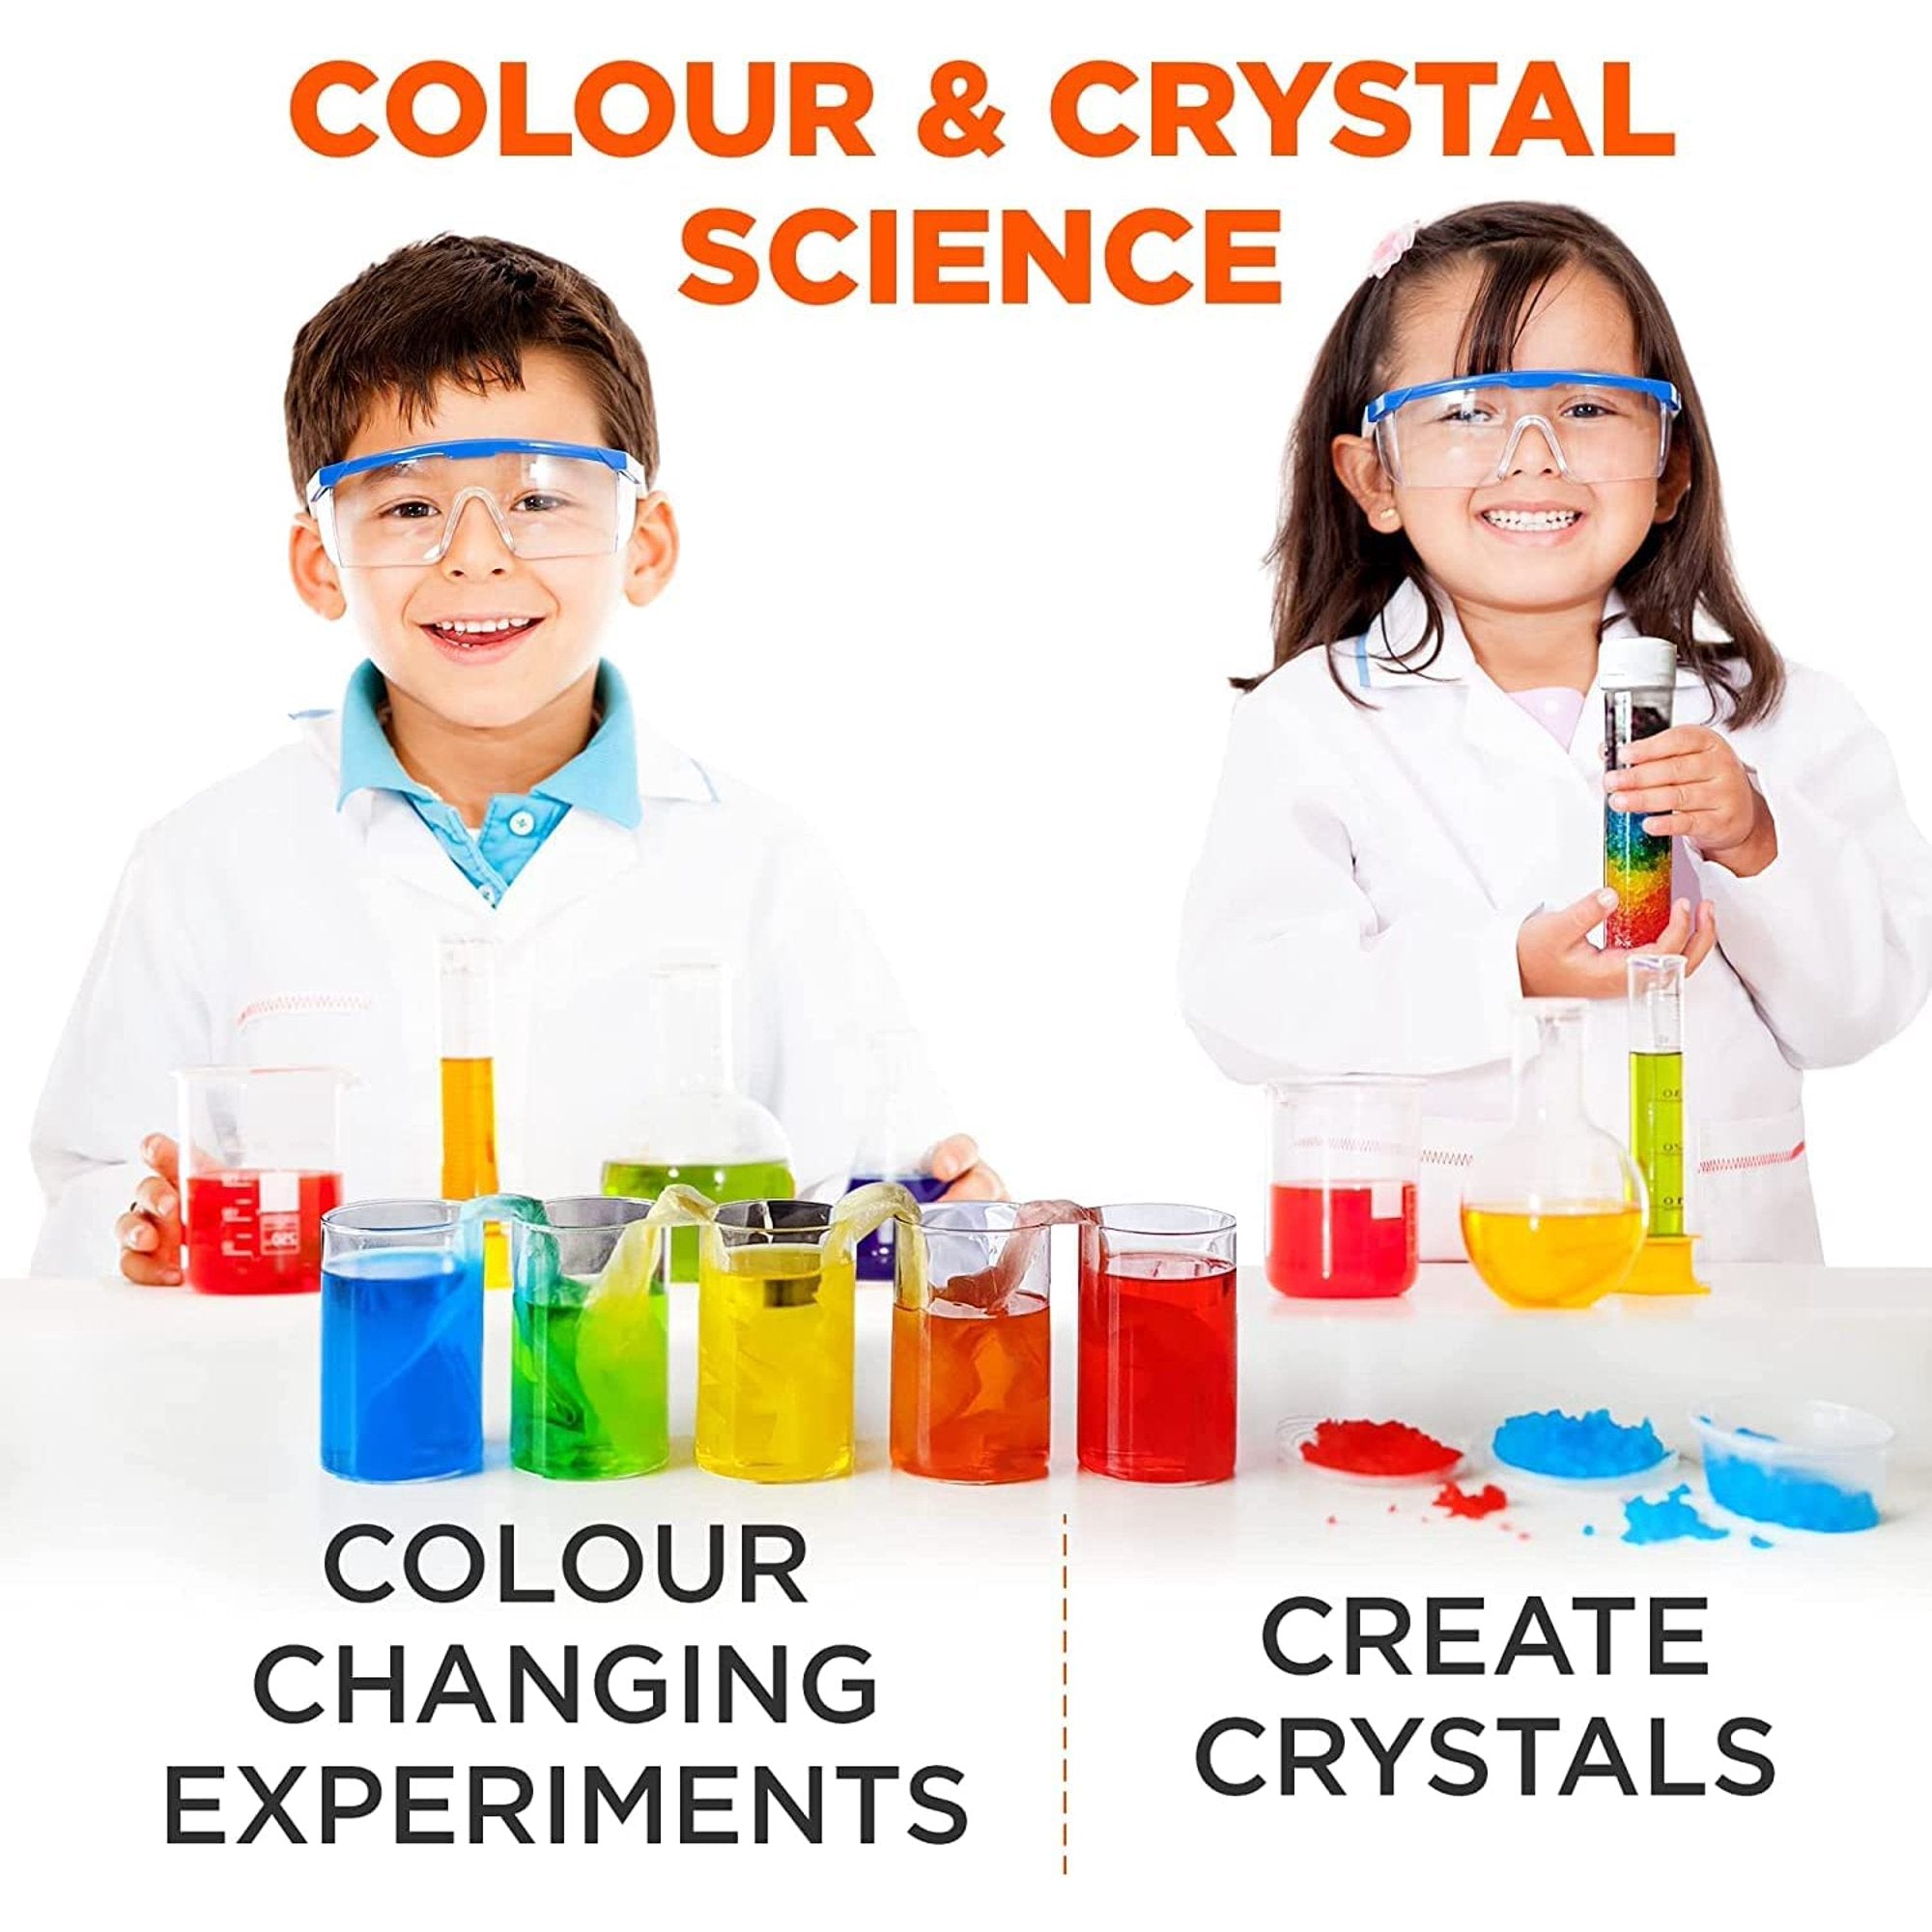 Terra Science Experiment Kit For Kids Aged 6-8-12-14 |Gift for 6-7 Year Old Boys & Girls| Chemistry Kit Set For 6-14 Year Olds